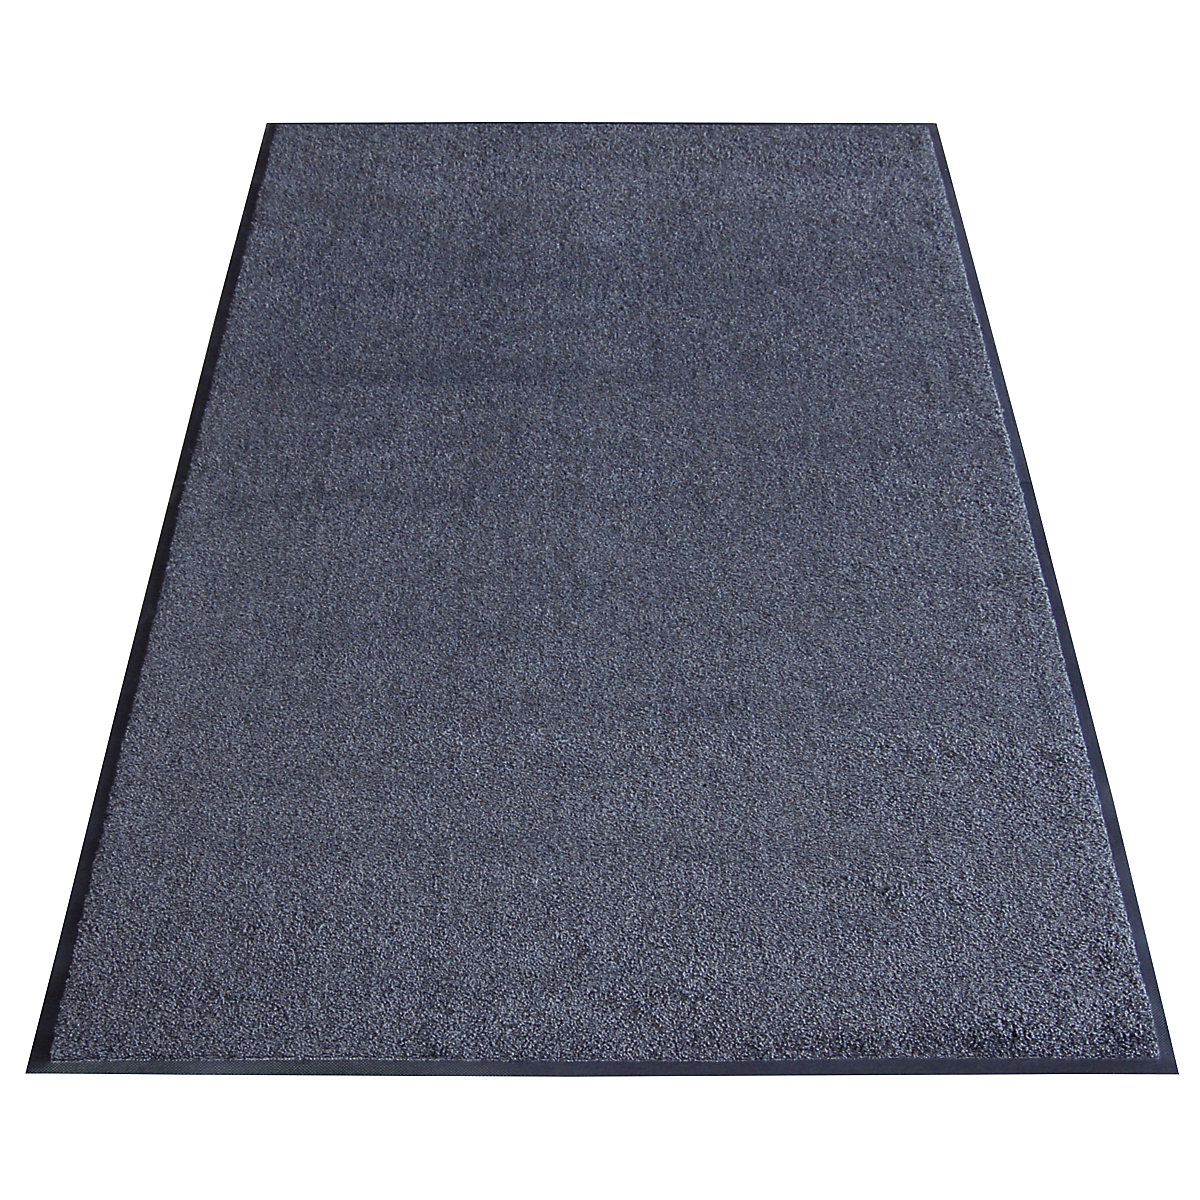 EAZYCARE WASH entrance matting, LxW 2400 x 1150 mm, charcoal-5